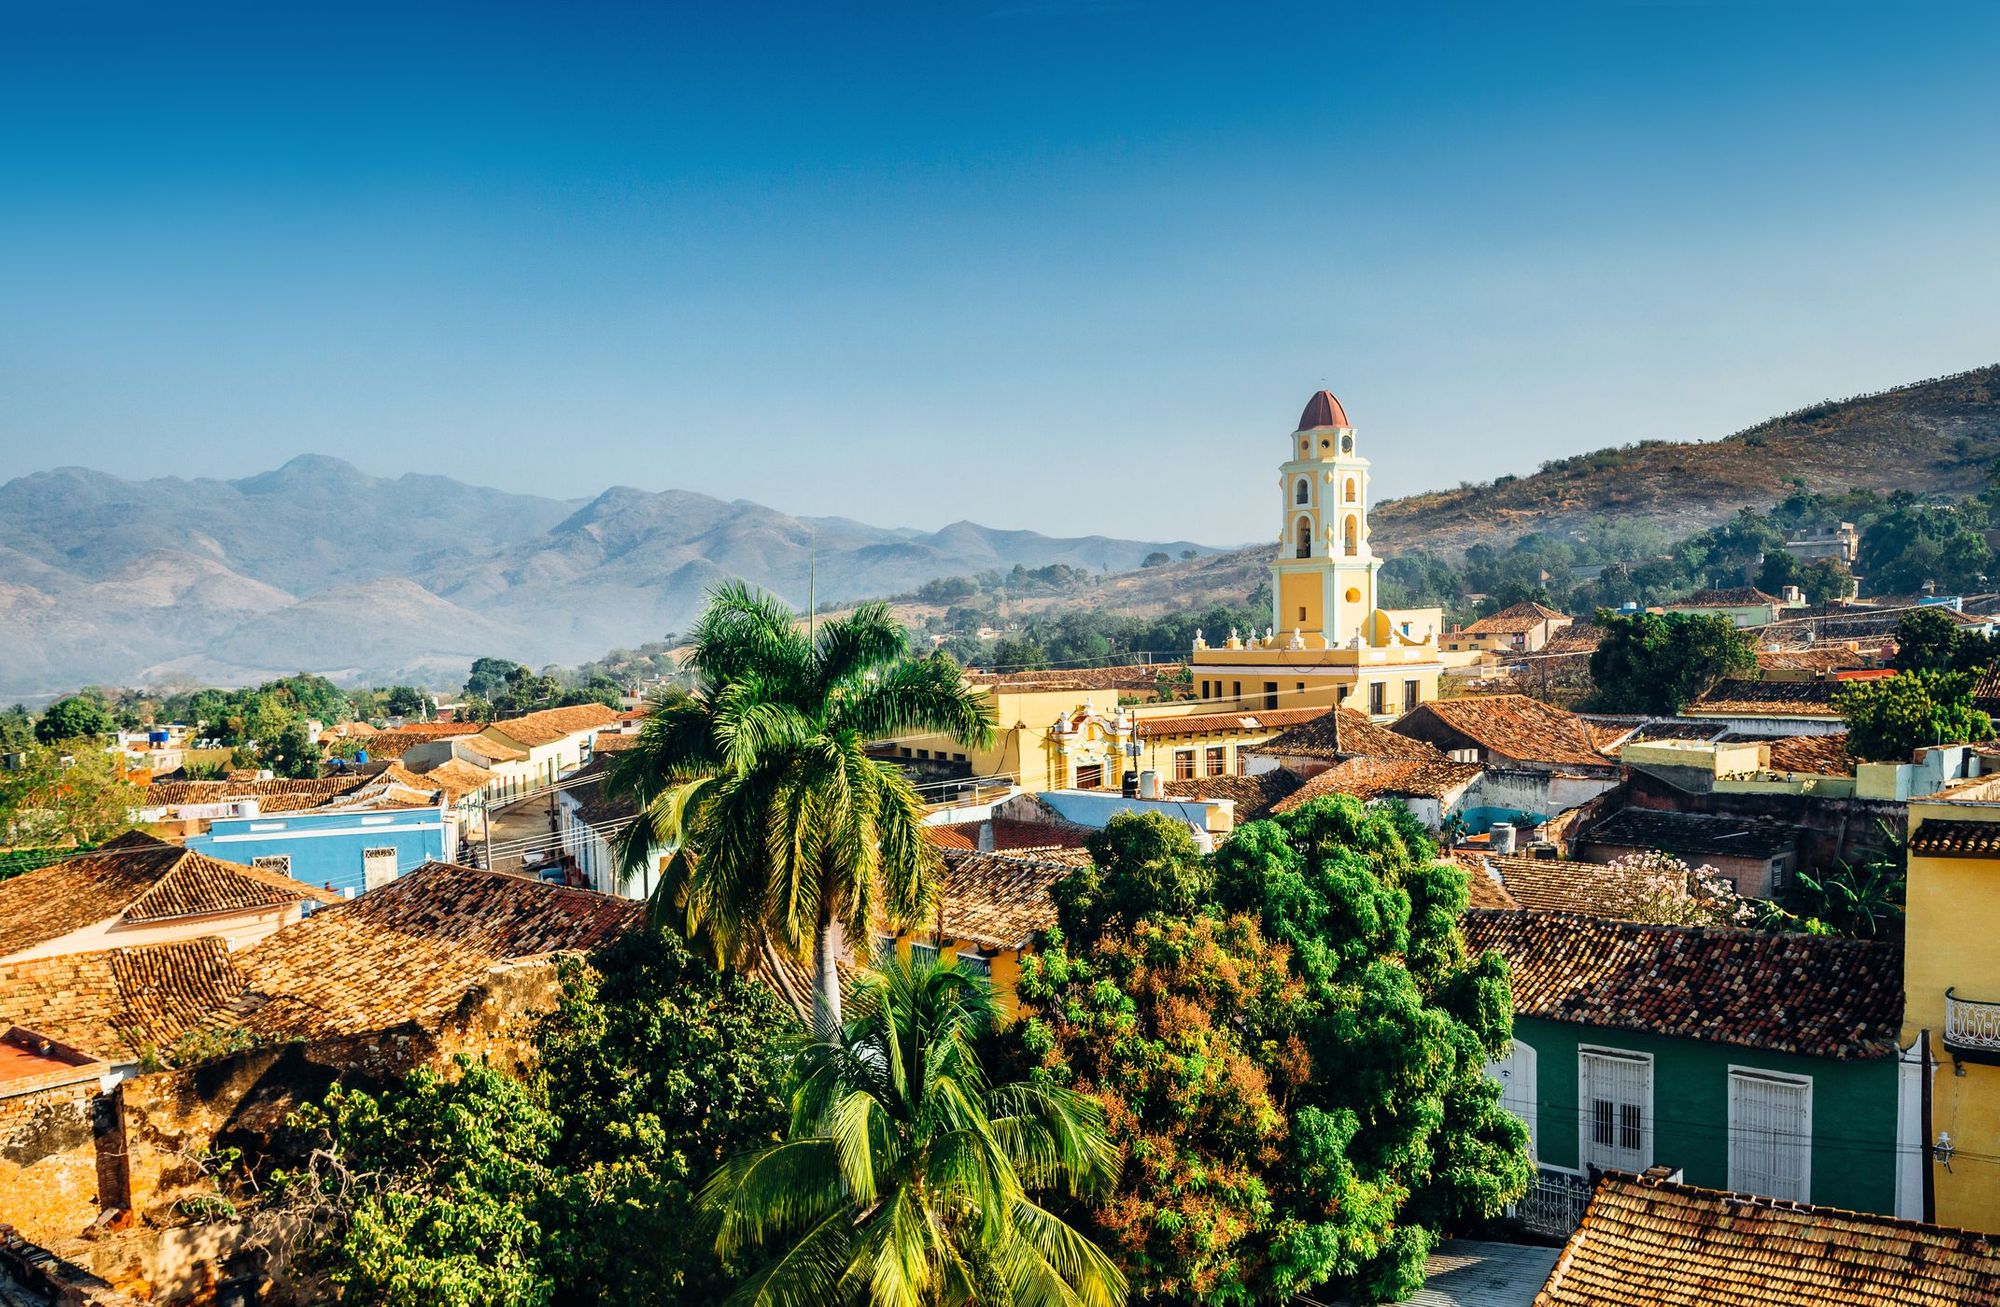 The scenic town of Trinidad, home to various casas and backdropped by the Escambray mountains. Photo: Getty